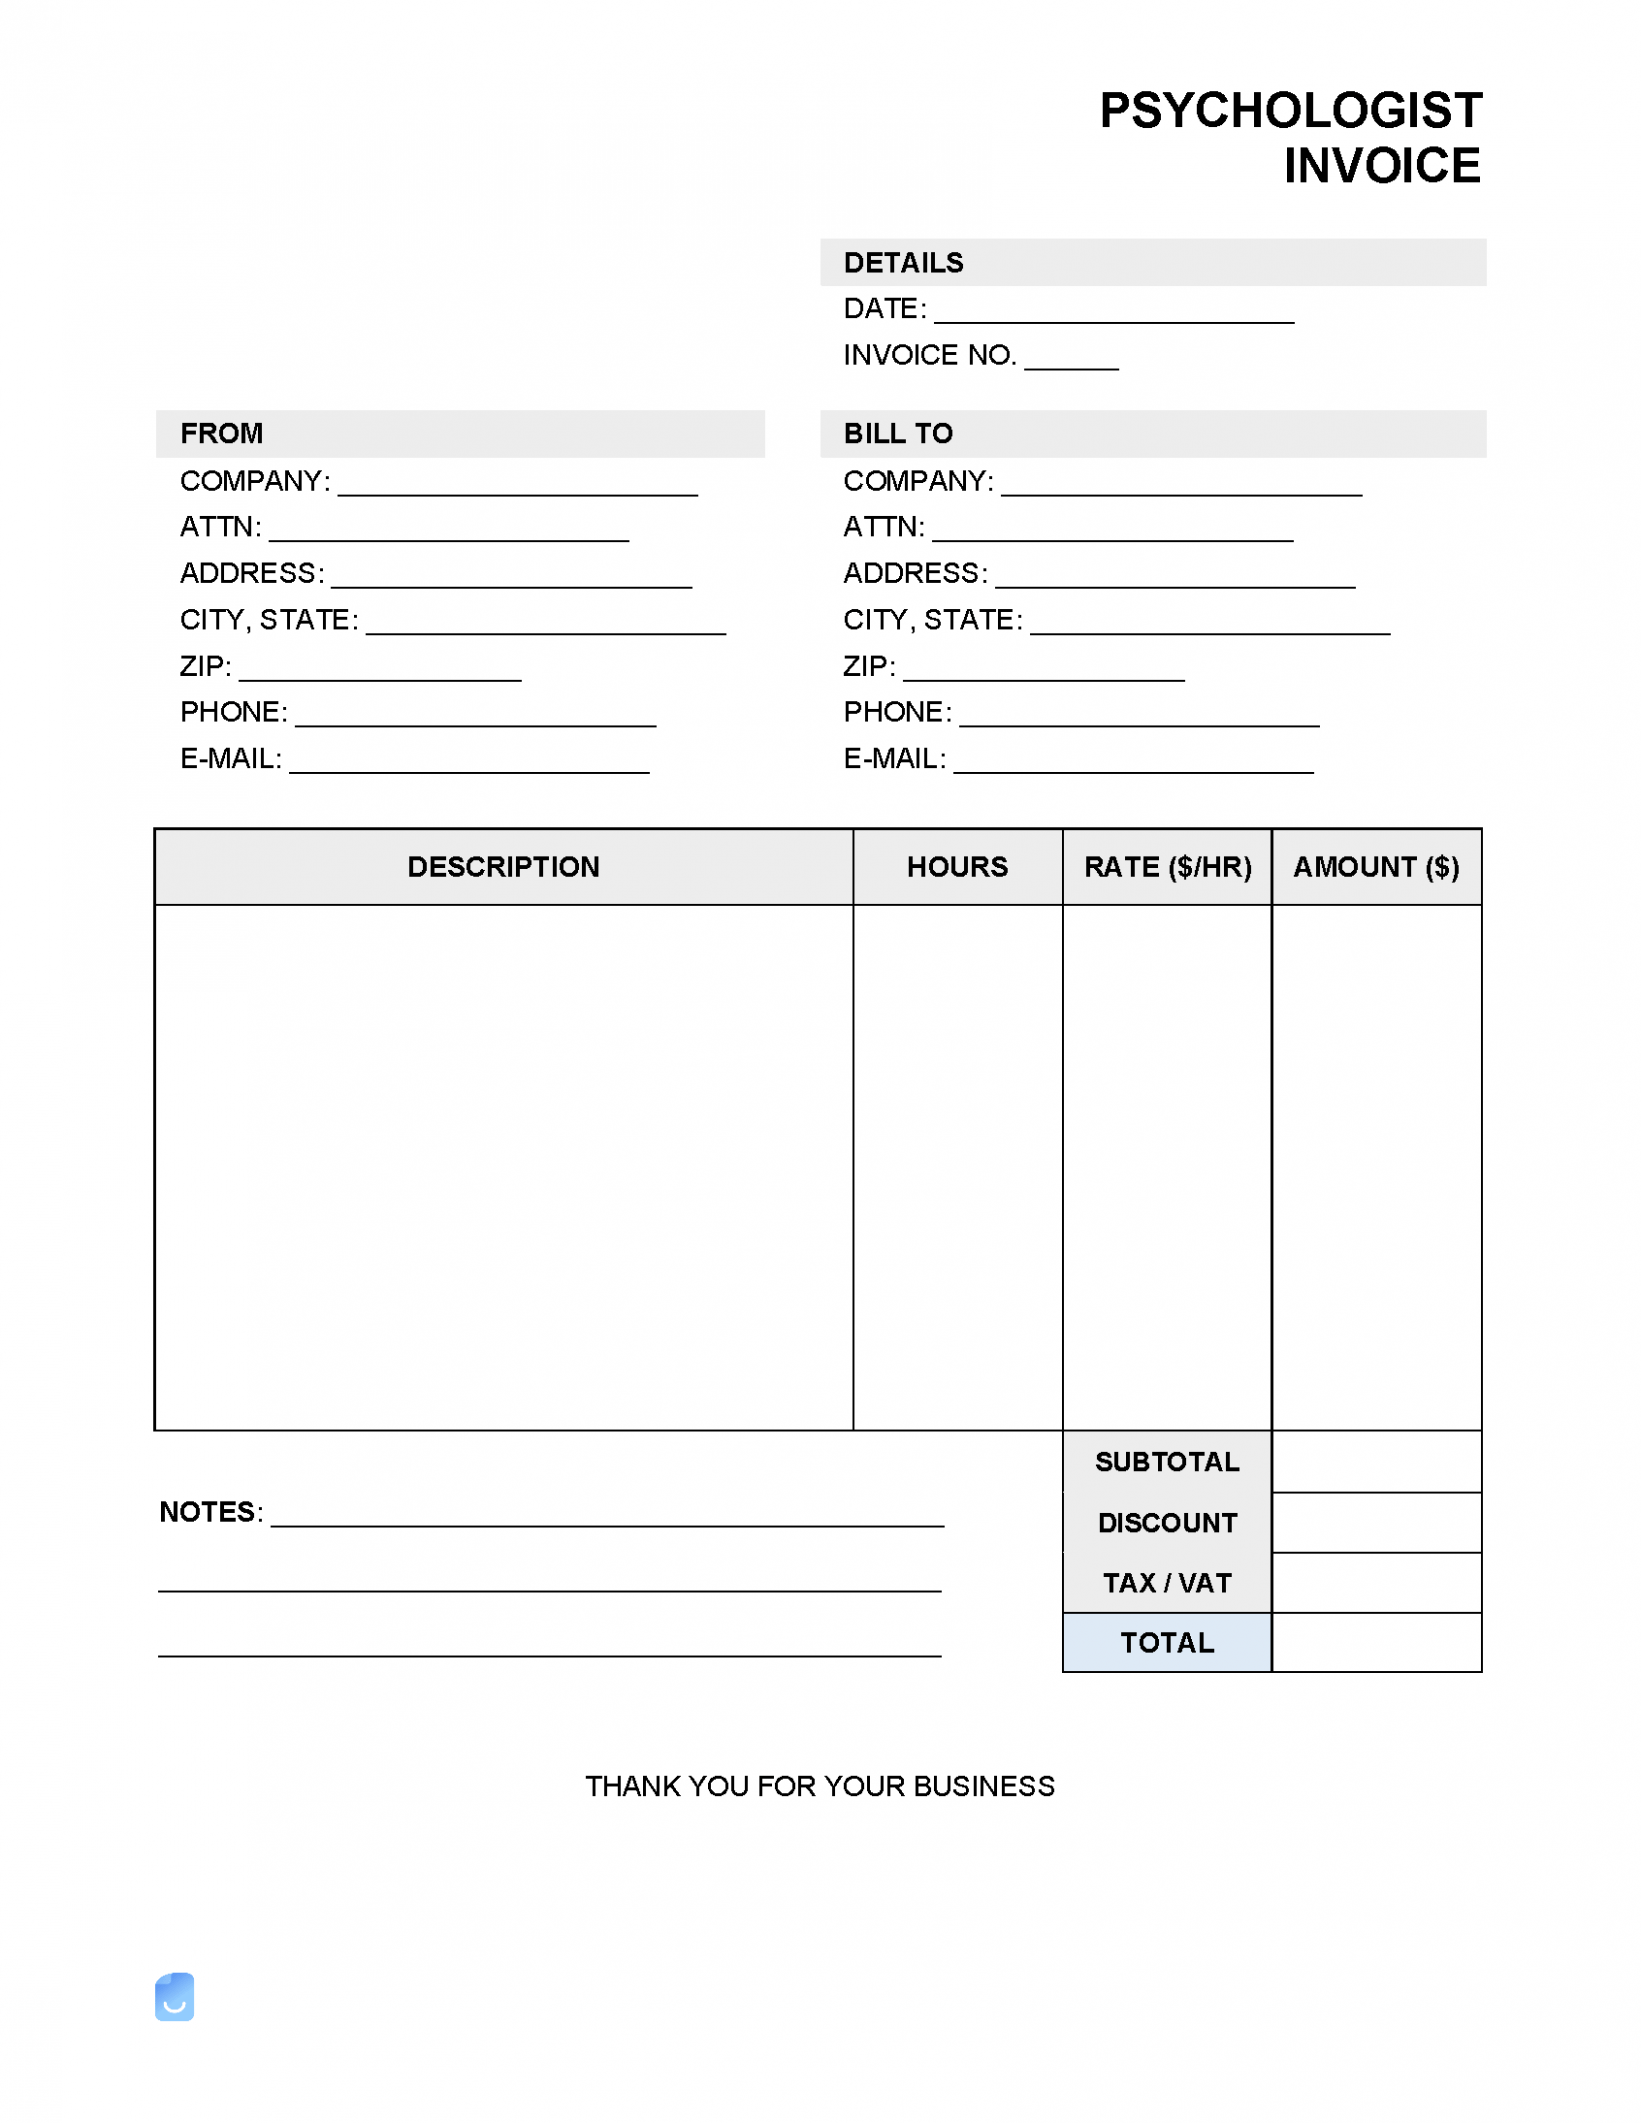 Sample Psychologist Invoice Template Word